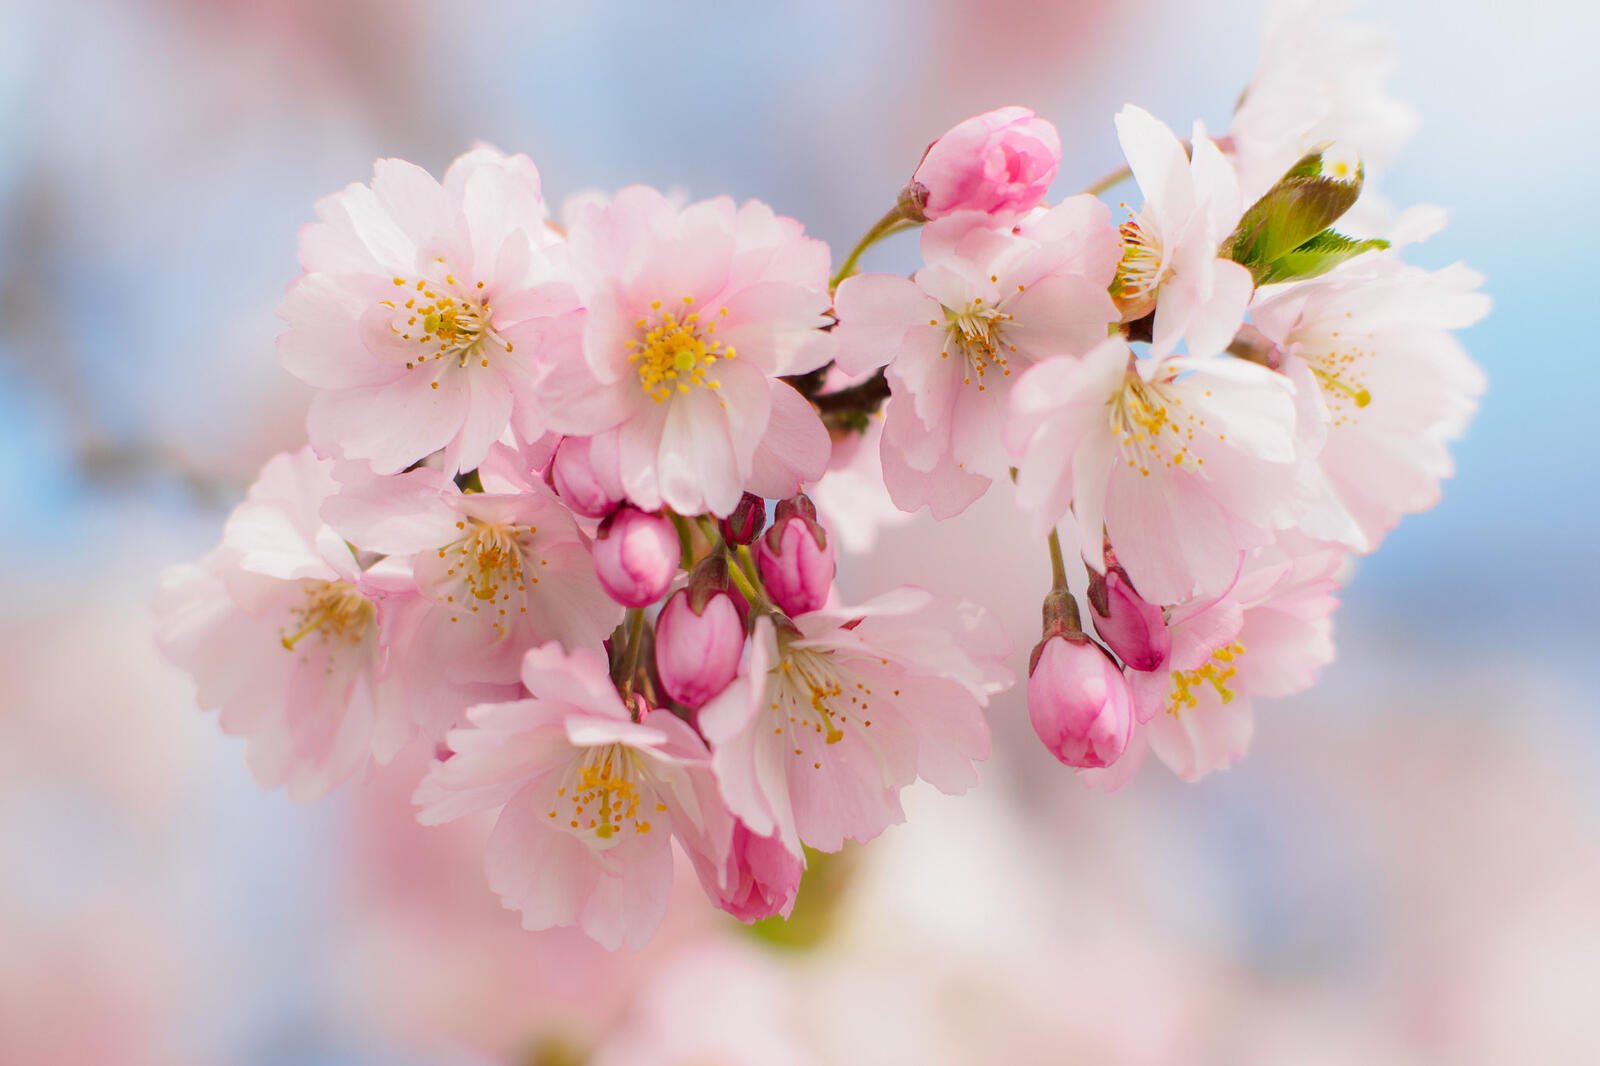 Wallpapers cherry blossom flora flowers on the desktop